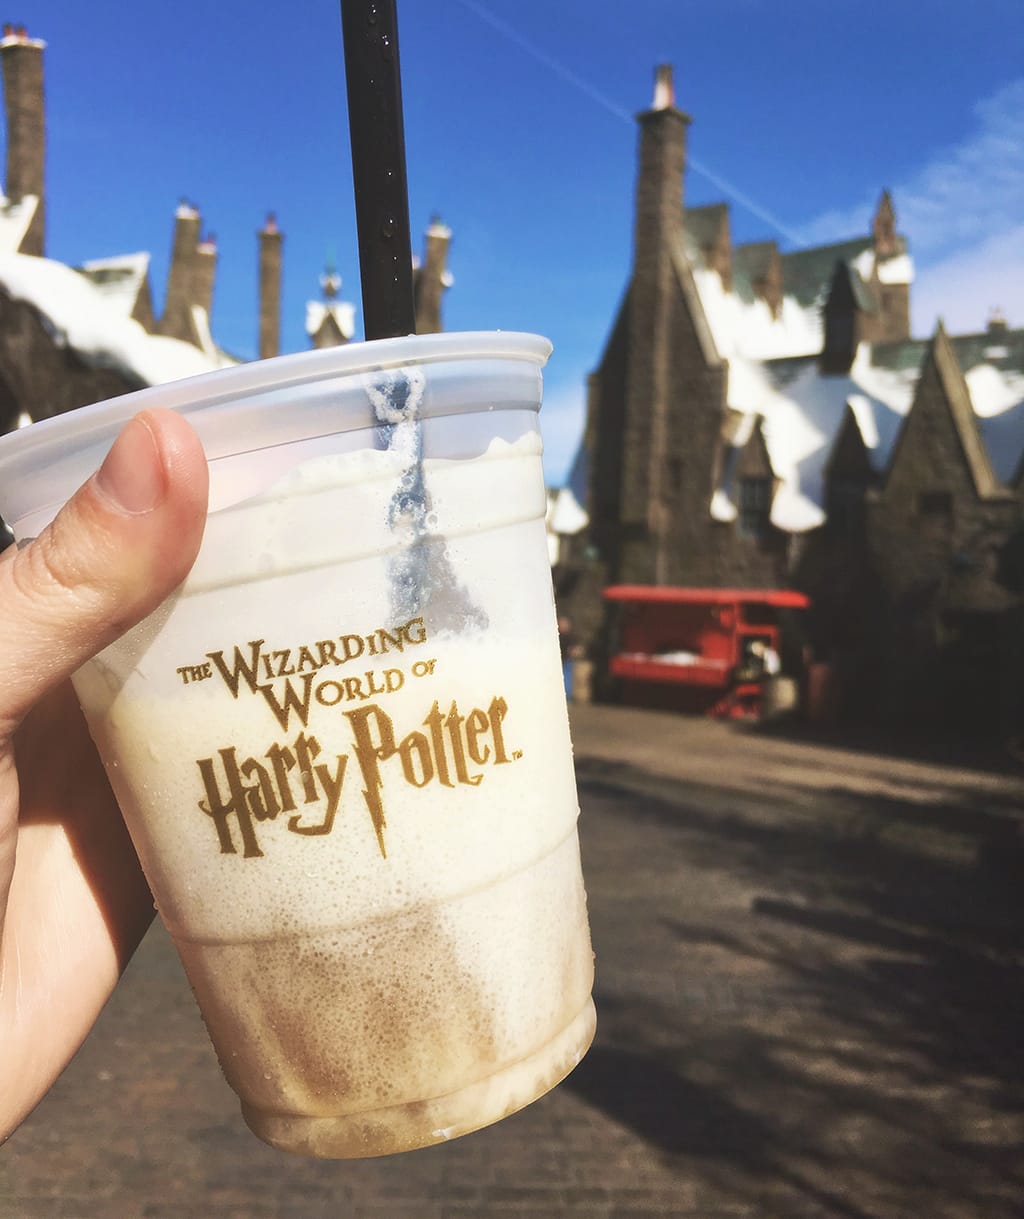 7 things you have to do at The Wizarding World of Harry Potter